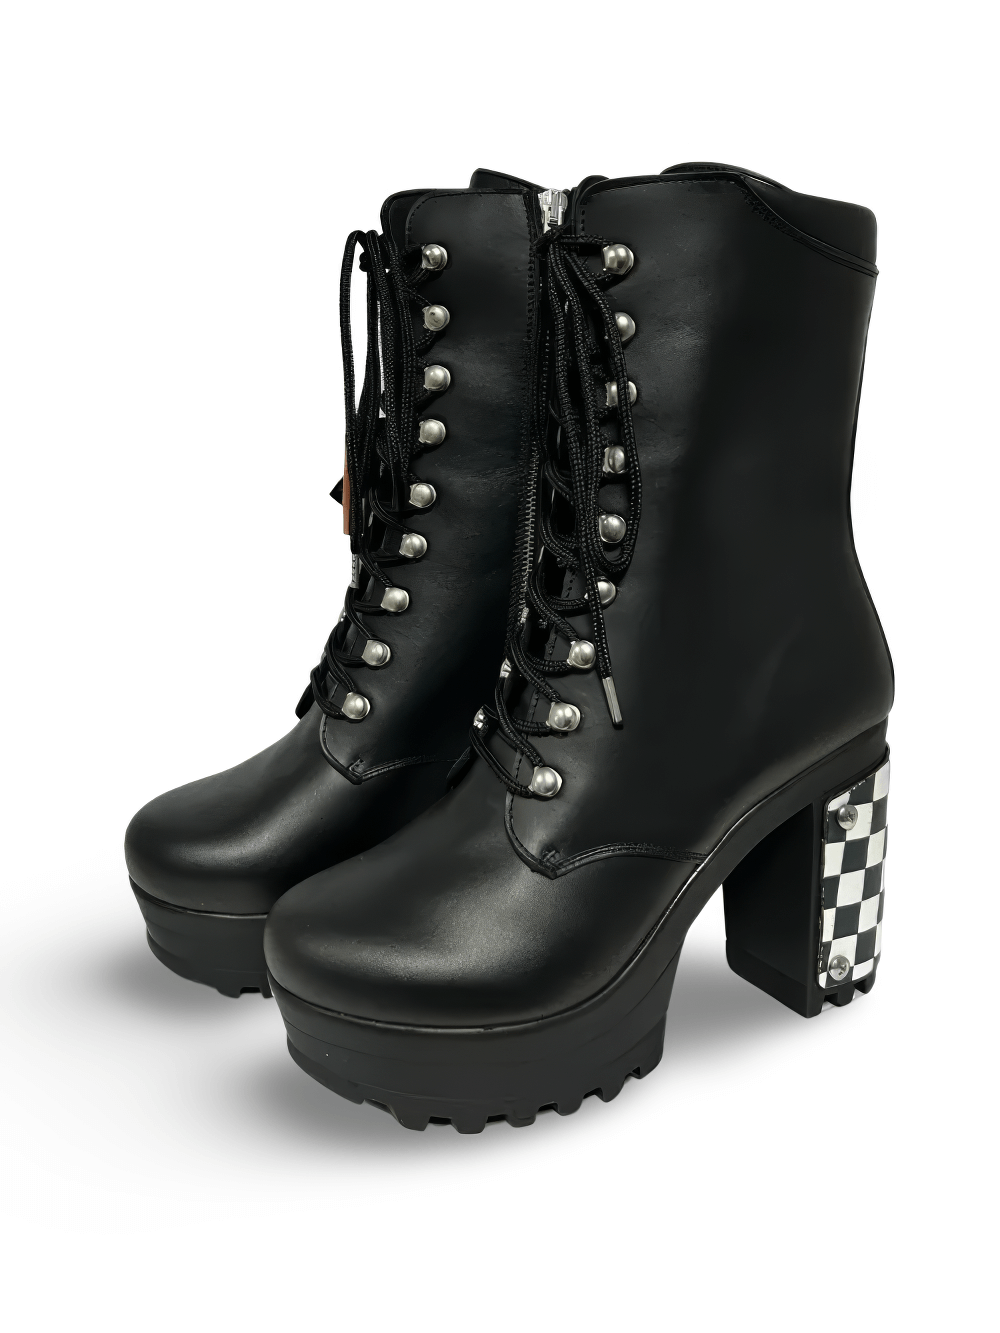 Gothic Style Mid-Calf Boots with Exotic Heel Design